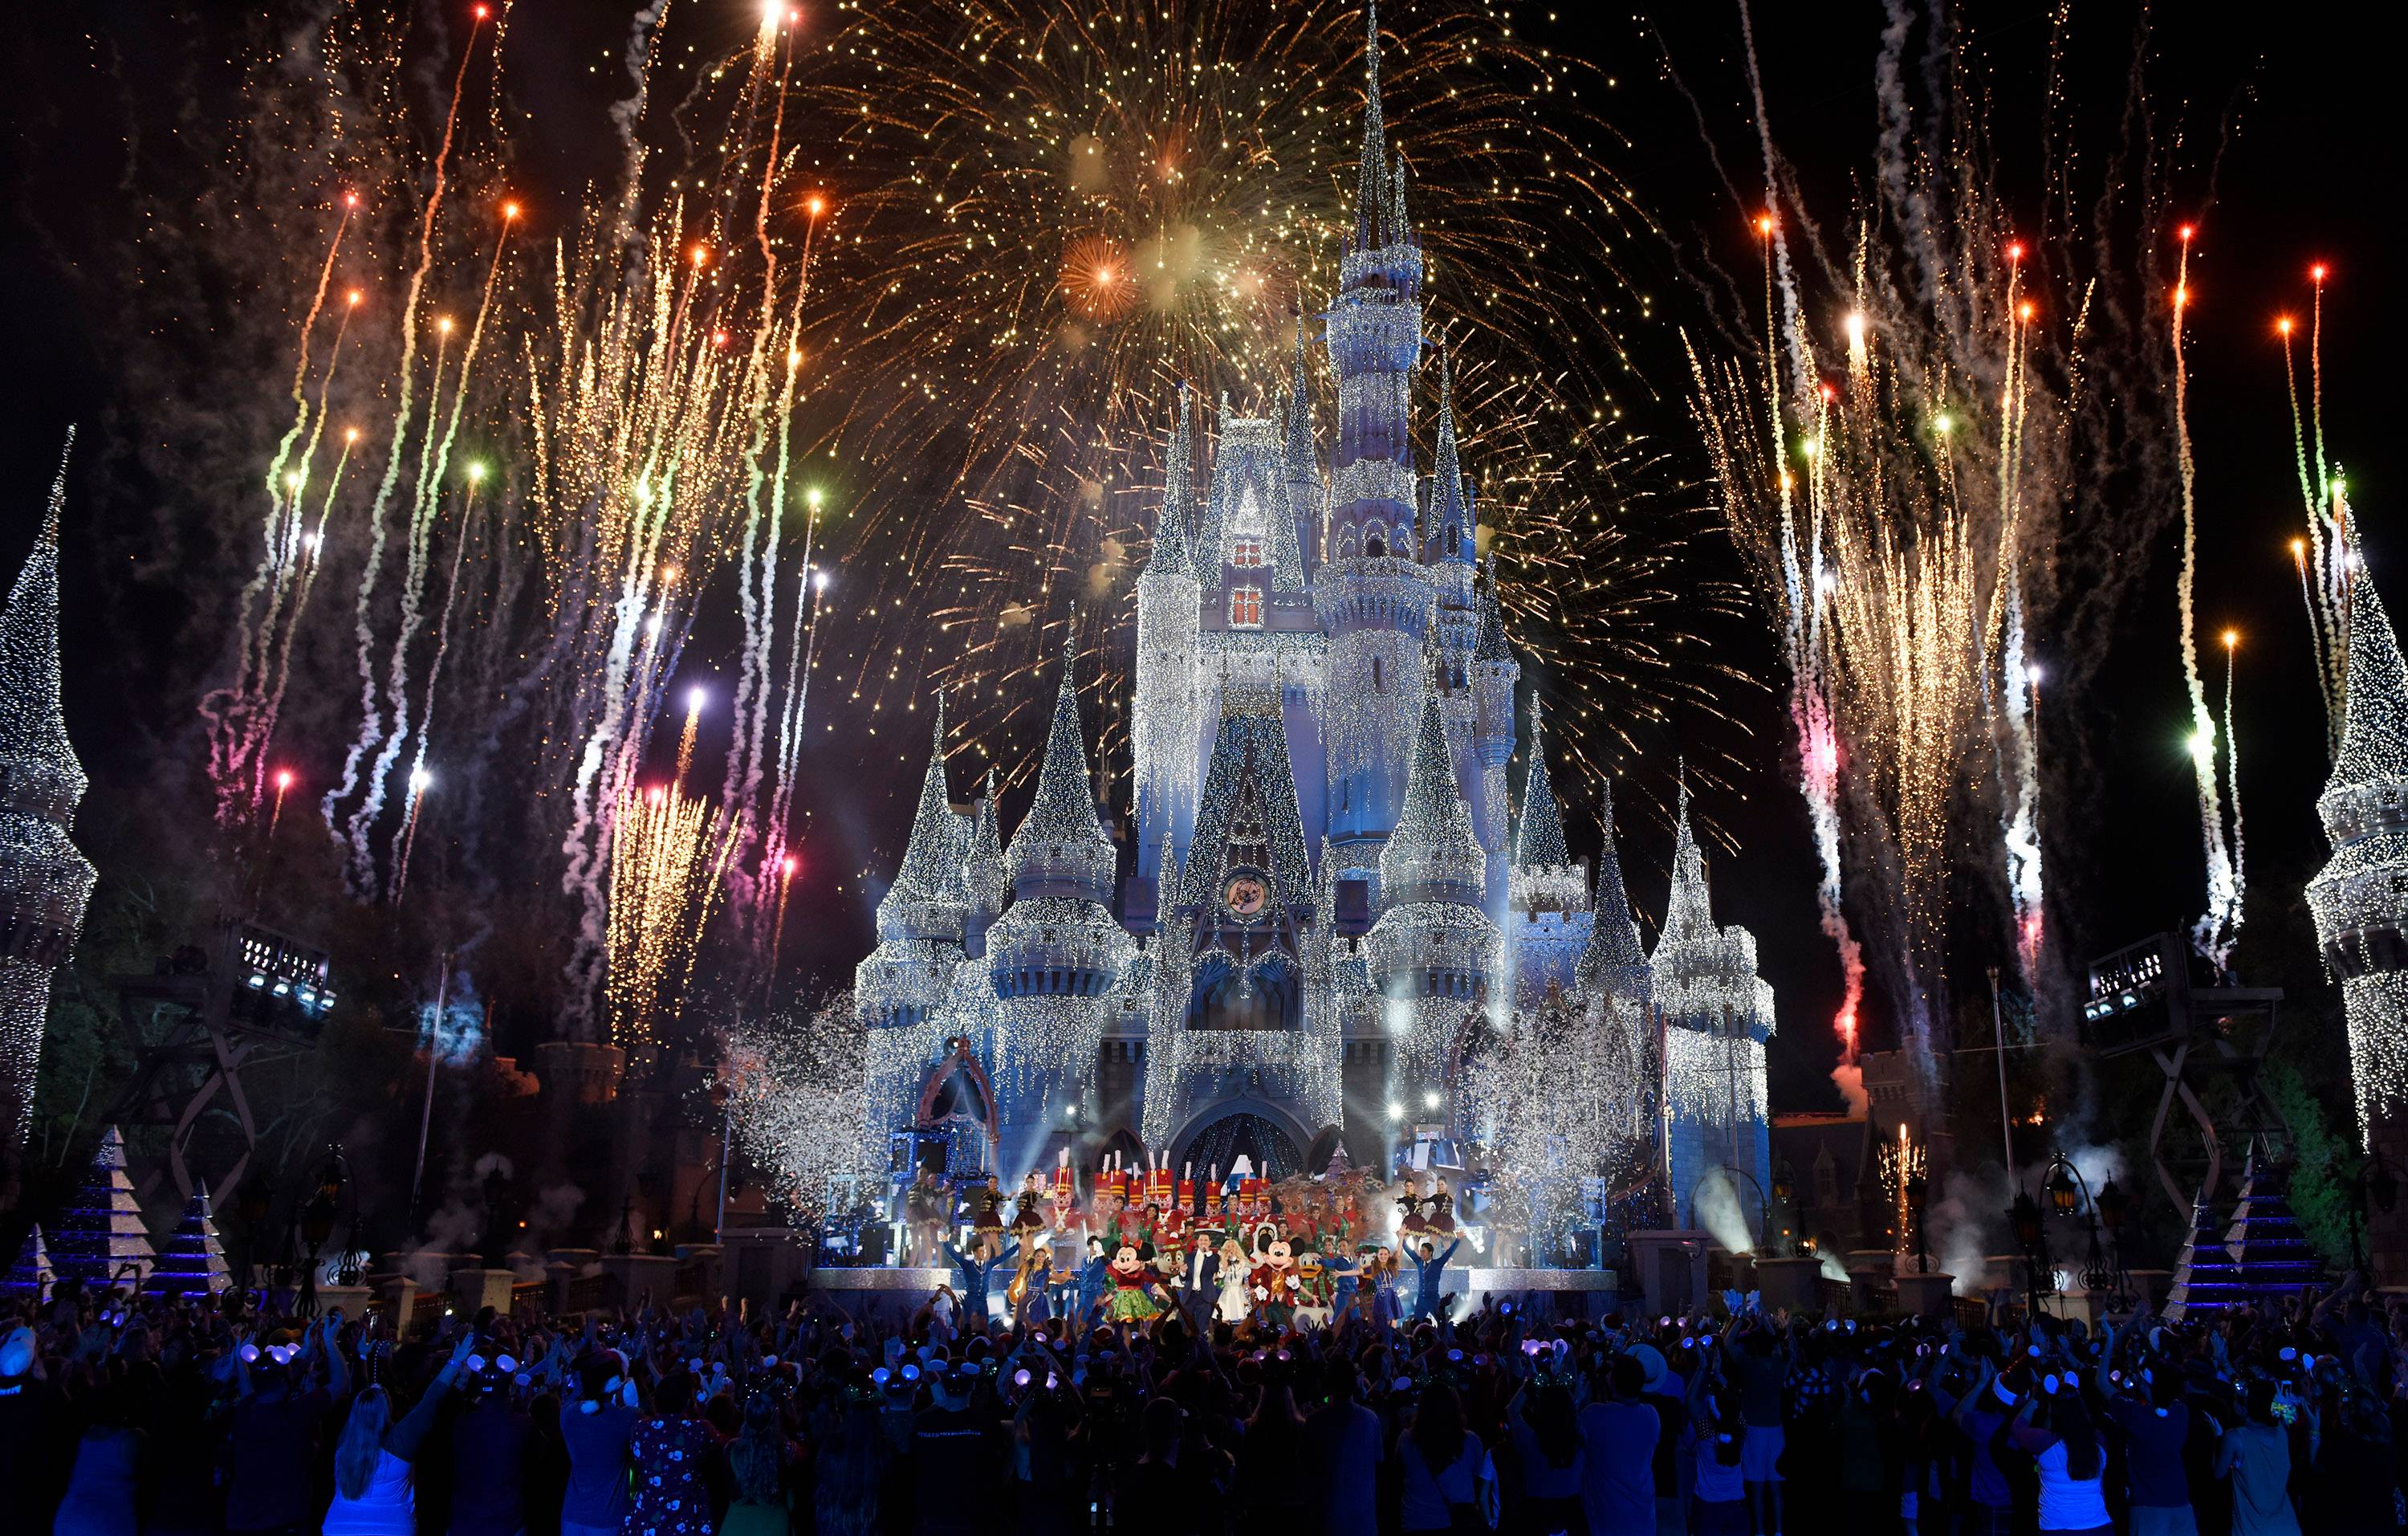 More details on the upcoming ABC Primetime Special 'The Wonderful World of Disney Magical Holiday Celebration'